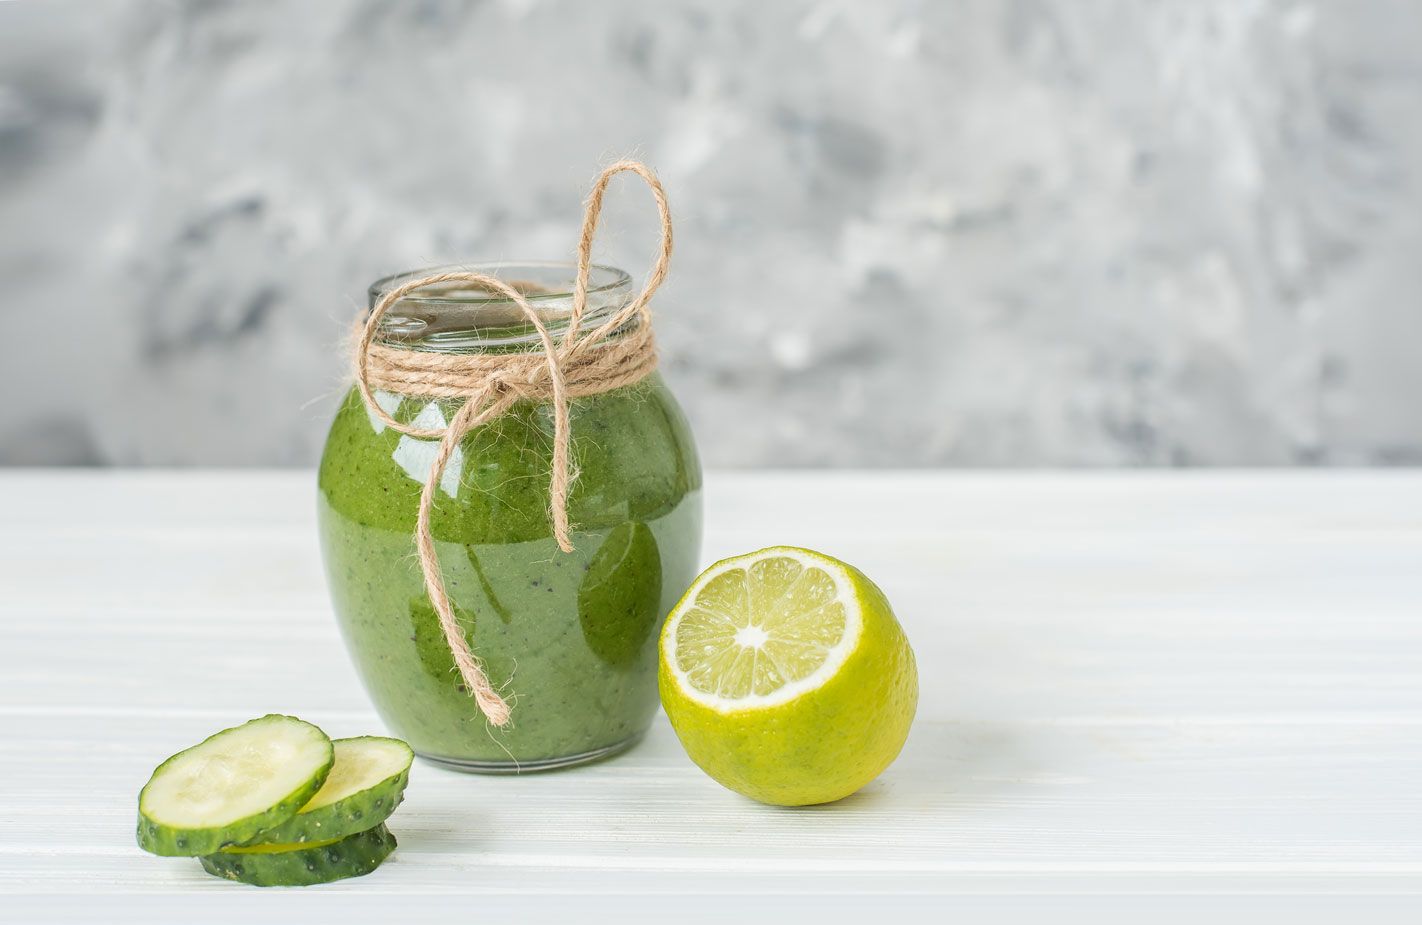 The green and clean smoothie